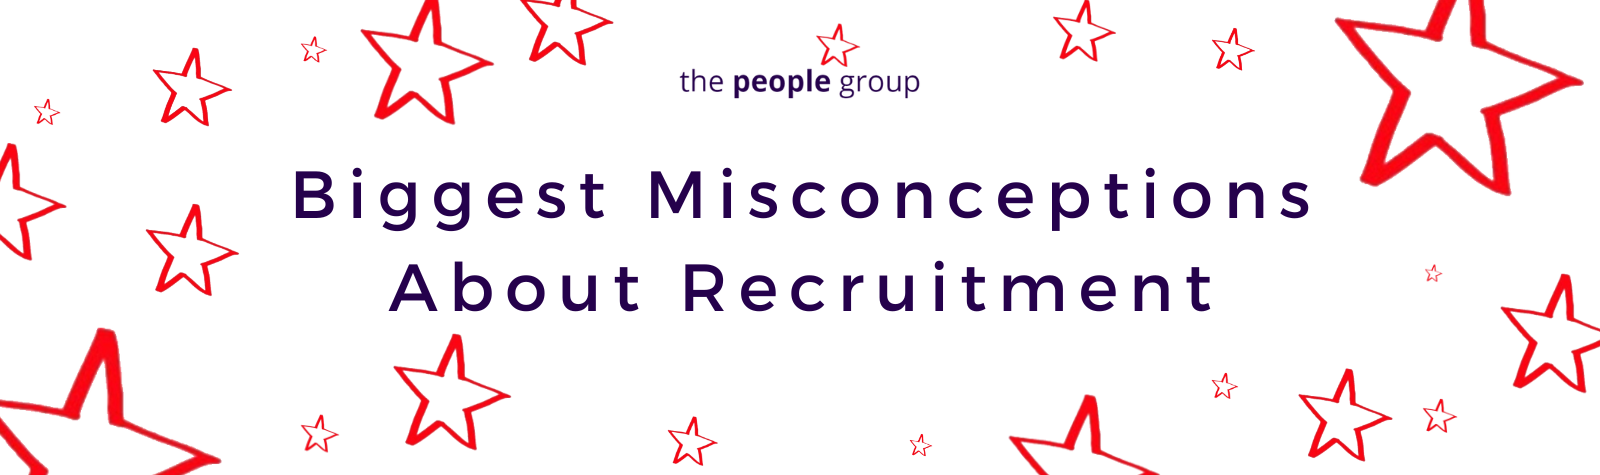 What Are the Biggest Misconceptions About recruitment?